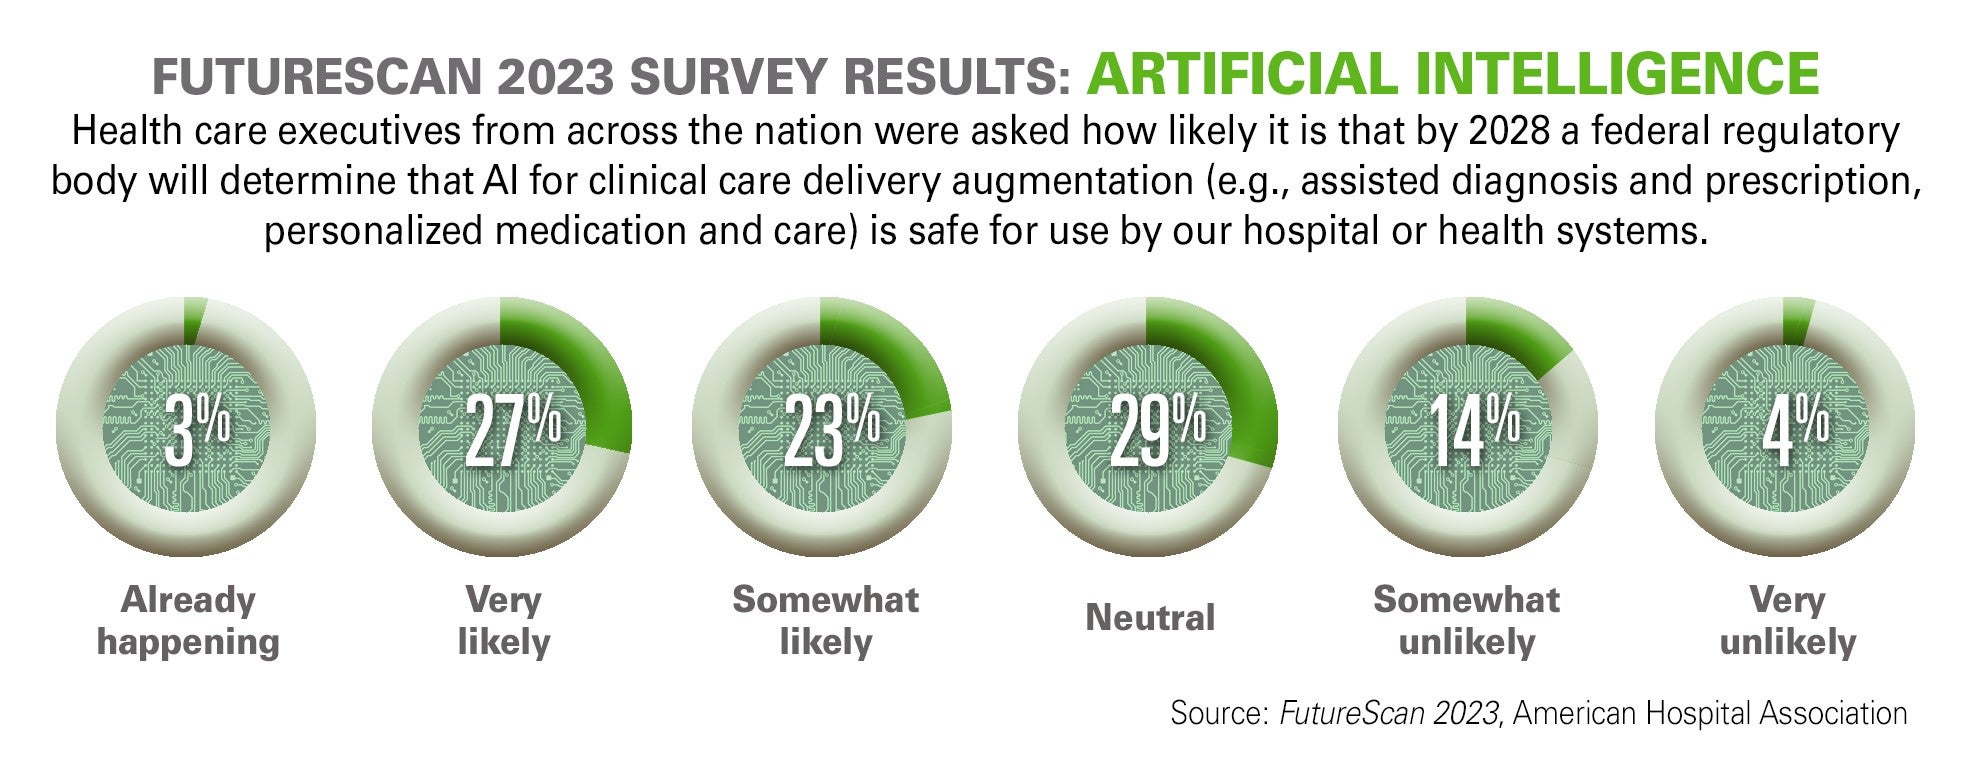 FutureScan 2023 Survey Results: Artificial Intelligence. Health care executives from across the nation were asked how likely it is that by 2028 a federal regulatory body will determine that AI for clinical care delivery augmentation (e.g., assisted diagnosis and prescription, personalized medication and care) is safe for use by our hospital or health systems. Already happening: 3%; Very likely: 27%; Somewhat likely: 23%; Neutral: 29%; Somewhat unlikely: 14%; Very unlikely: 4%. Source: FutureScan 2023, American Hospital Association.